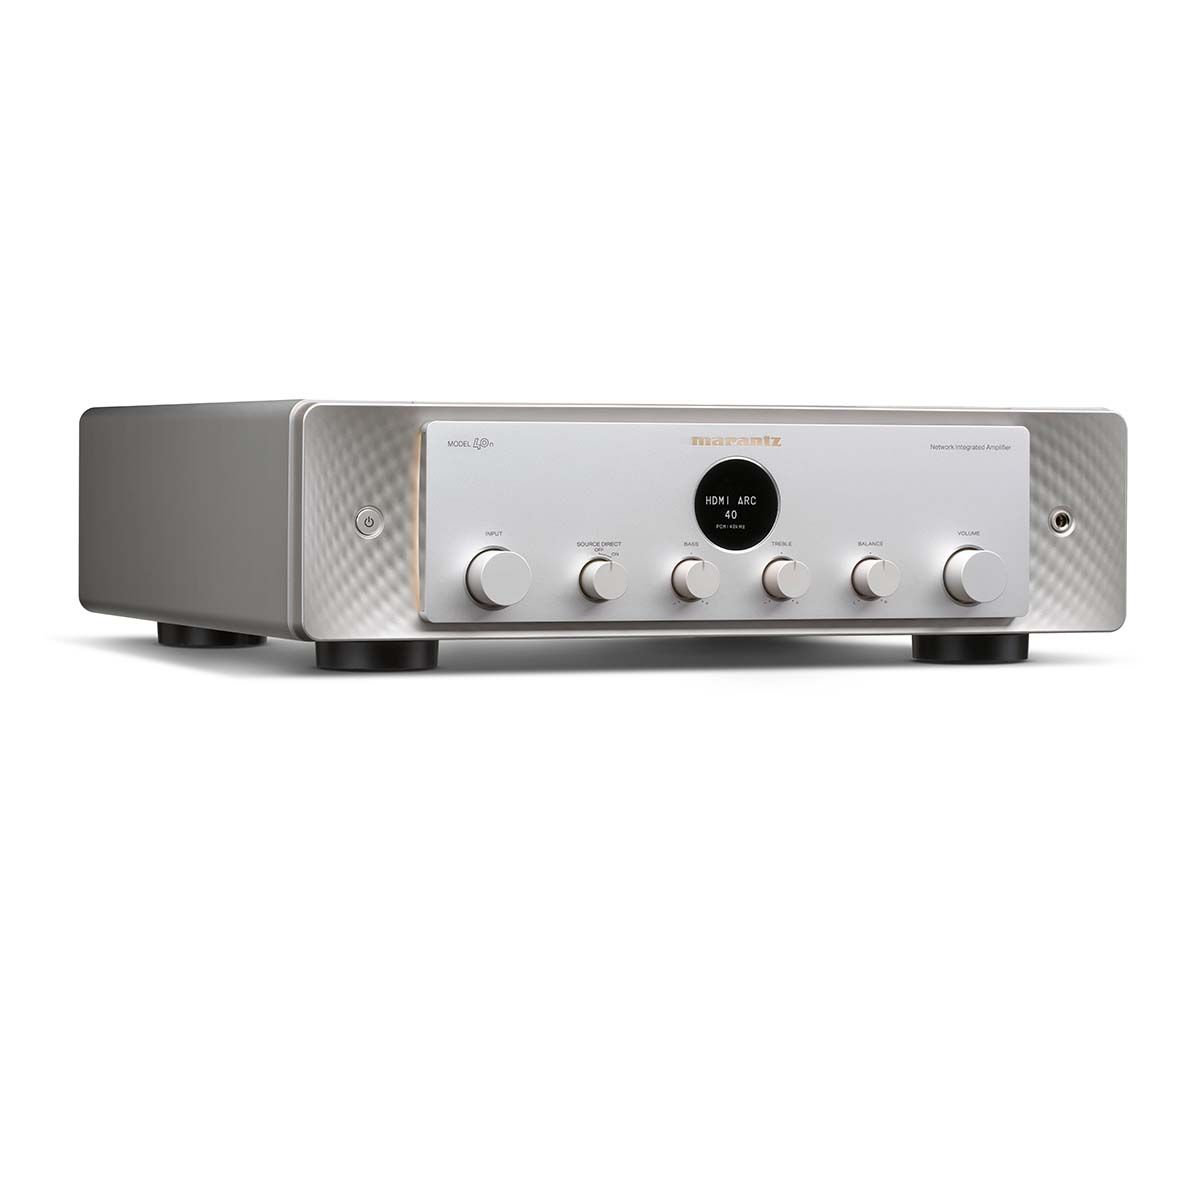 Marantz Model 40n Integrated Amplifier, Silver and Gold, front angle view